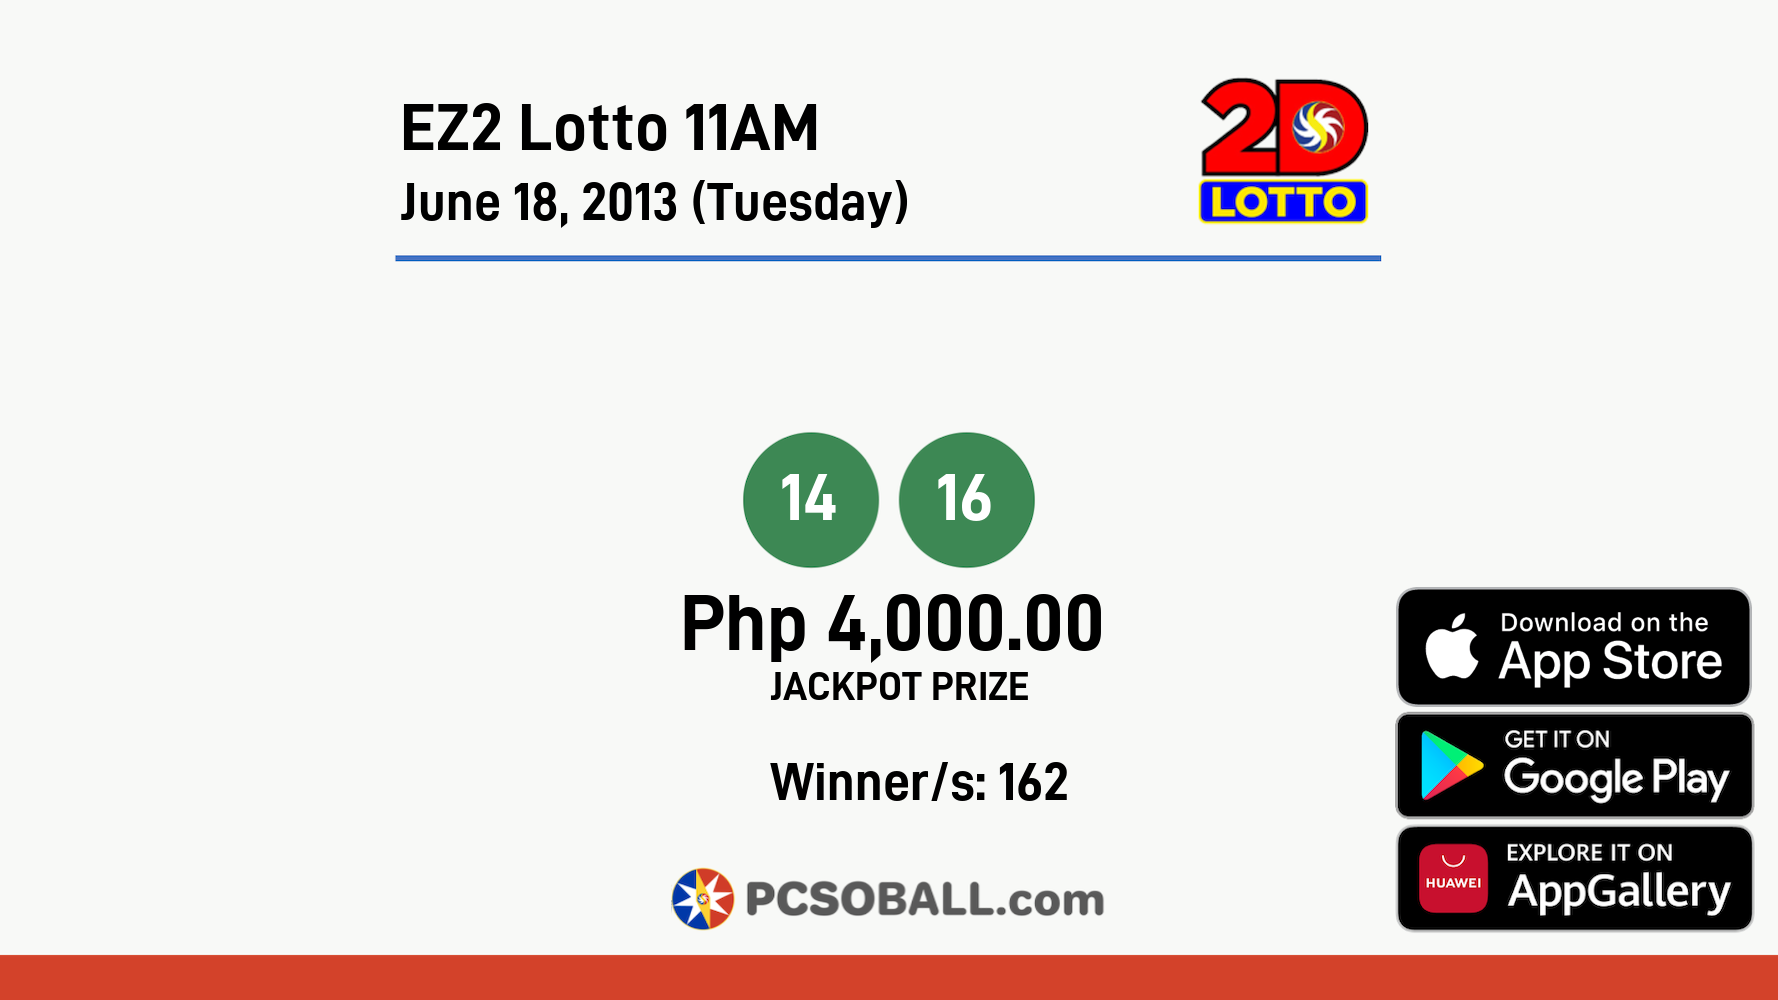 EZ2 Lotto 11AM June 18, 2013 (Tuesday) Result